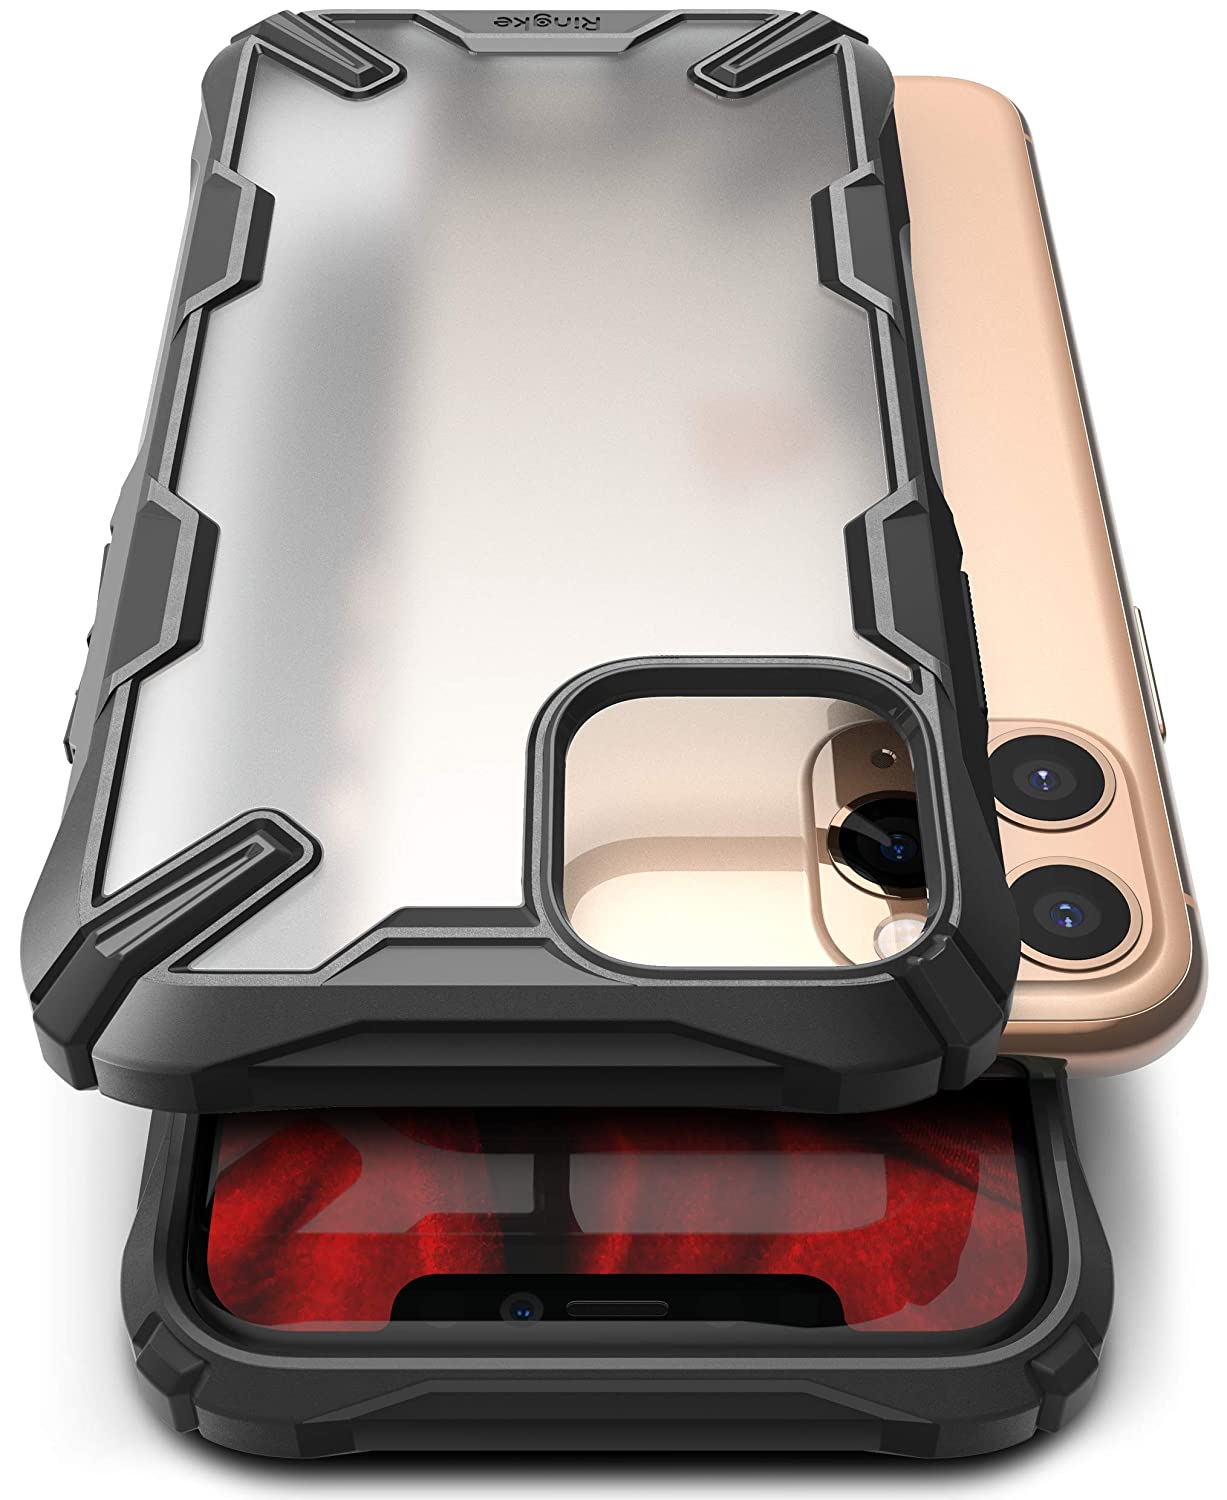 iPhone 11 Case  Ringke Fusion – Ringke Official Store